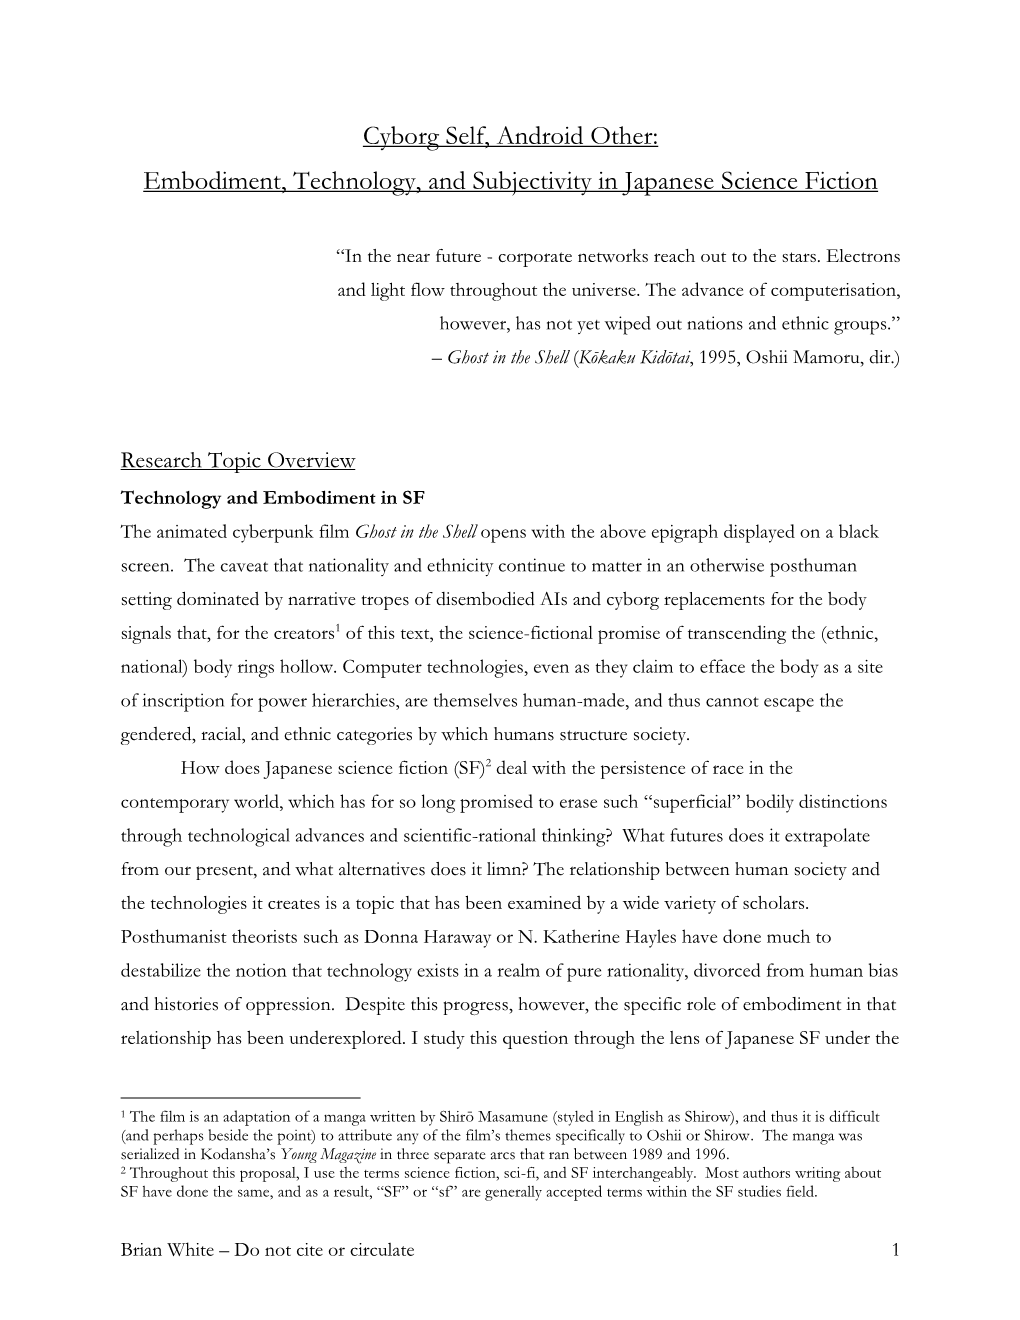 Cyborg Self, Android Other: Embodiment, Technology, and Subjectivity in Japanese Science Fiction